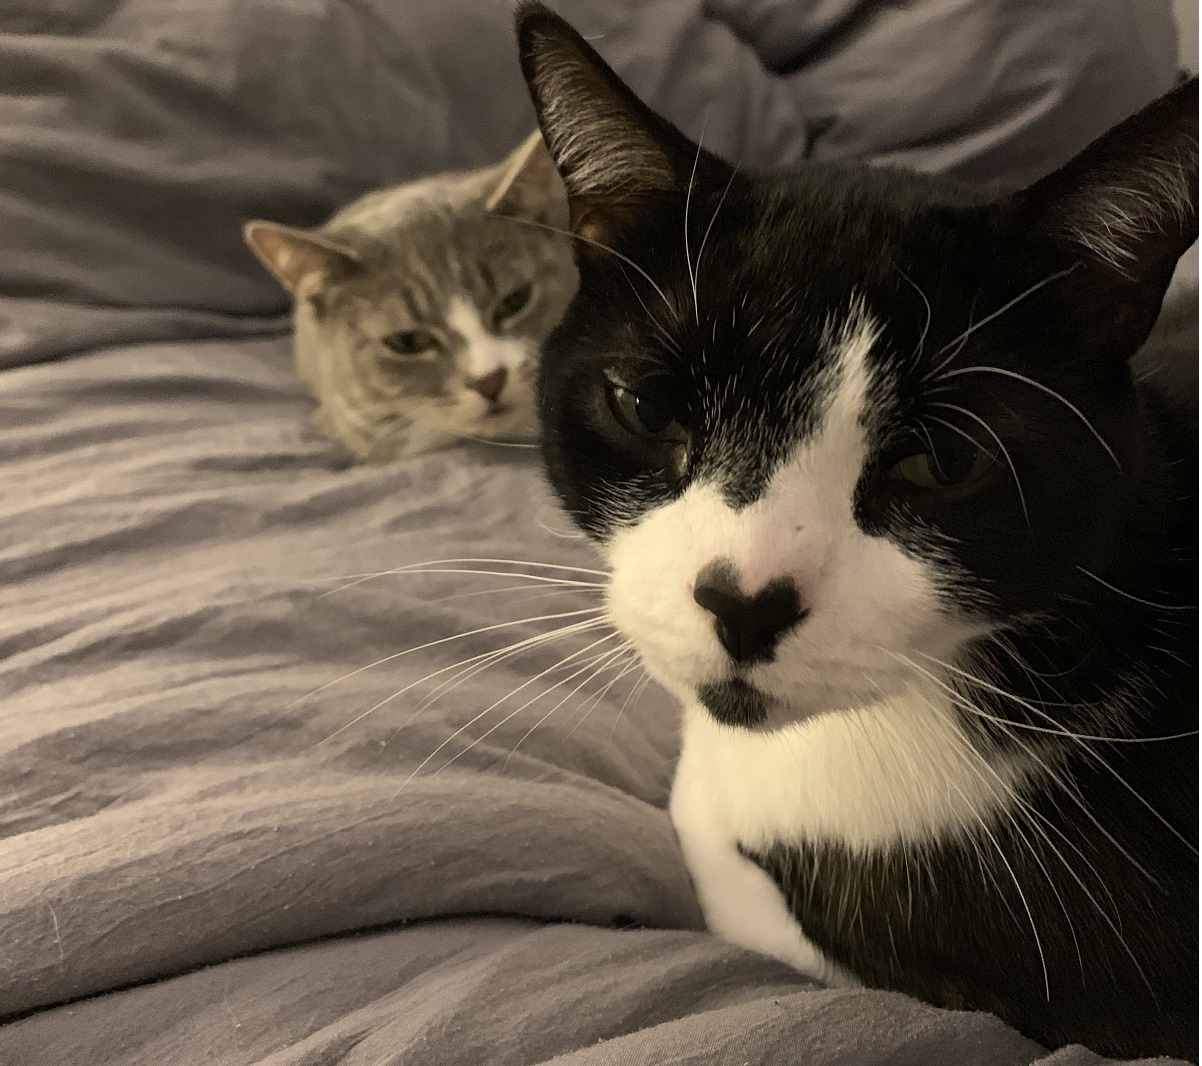 2 cats cuddling in bed